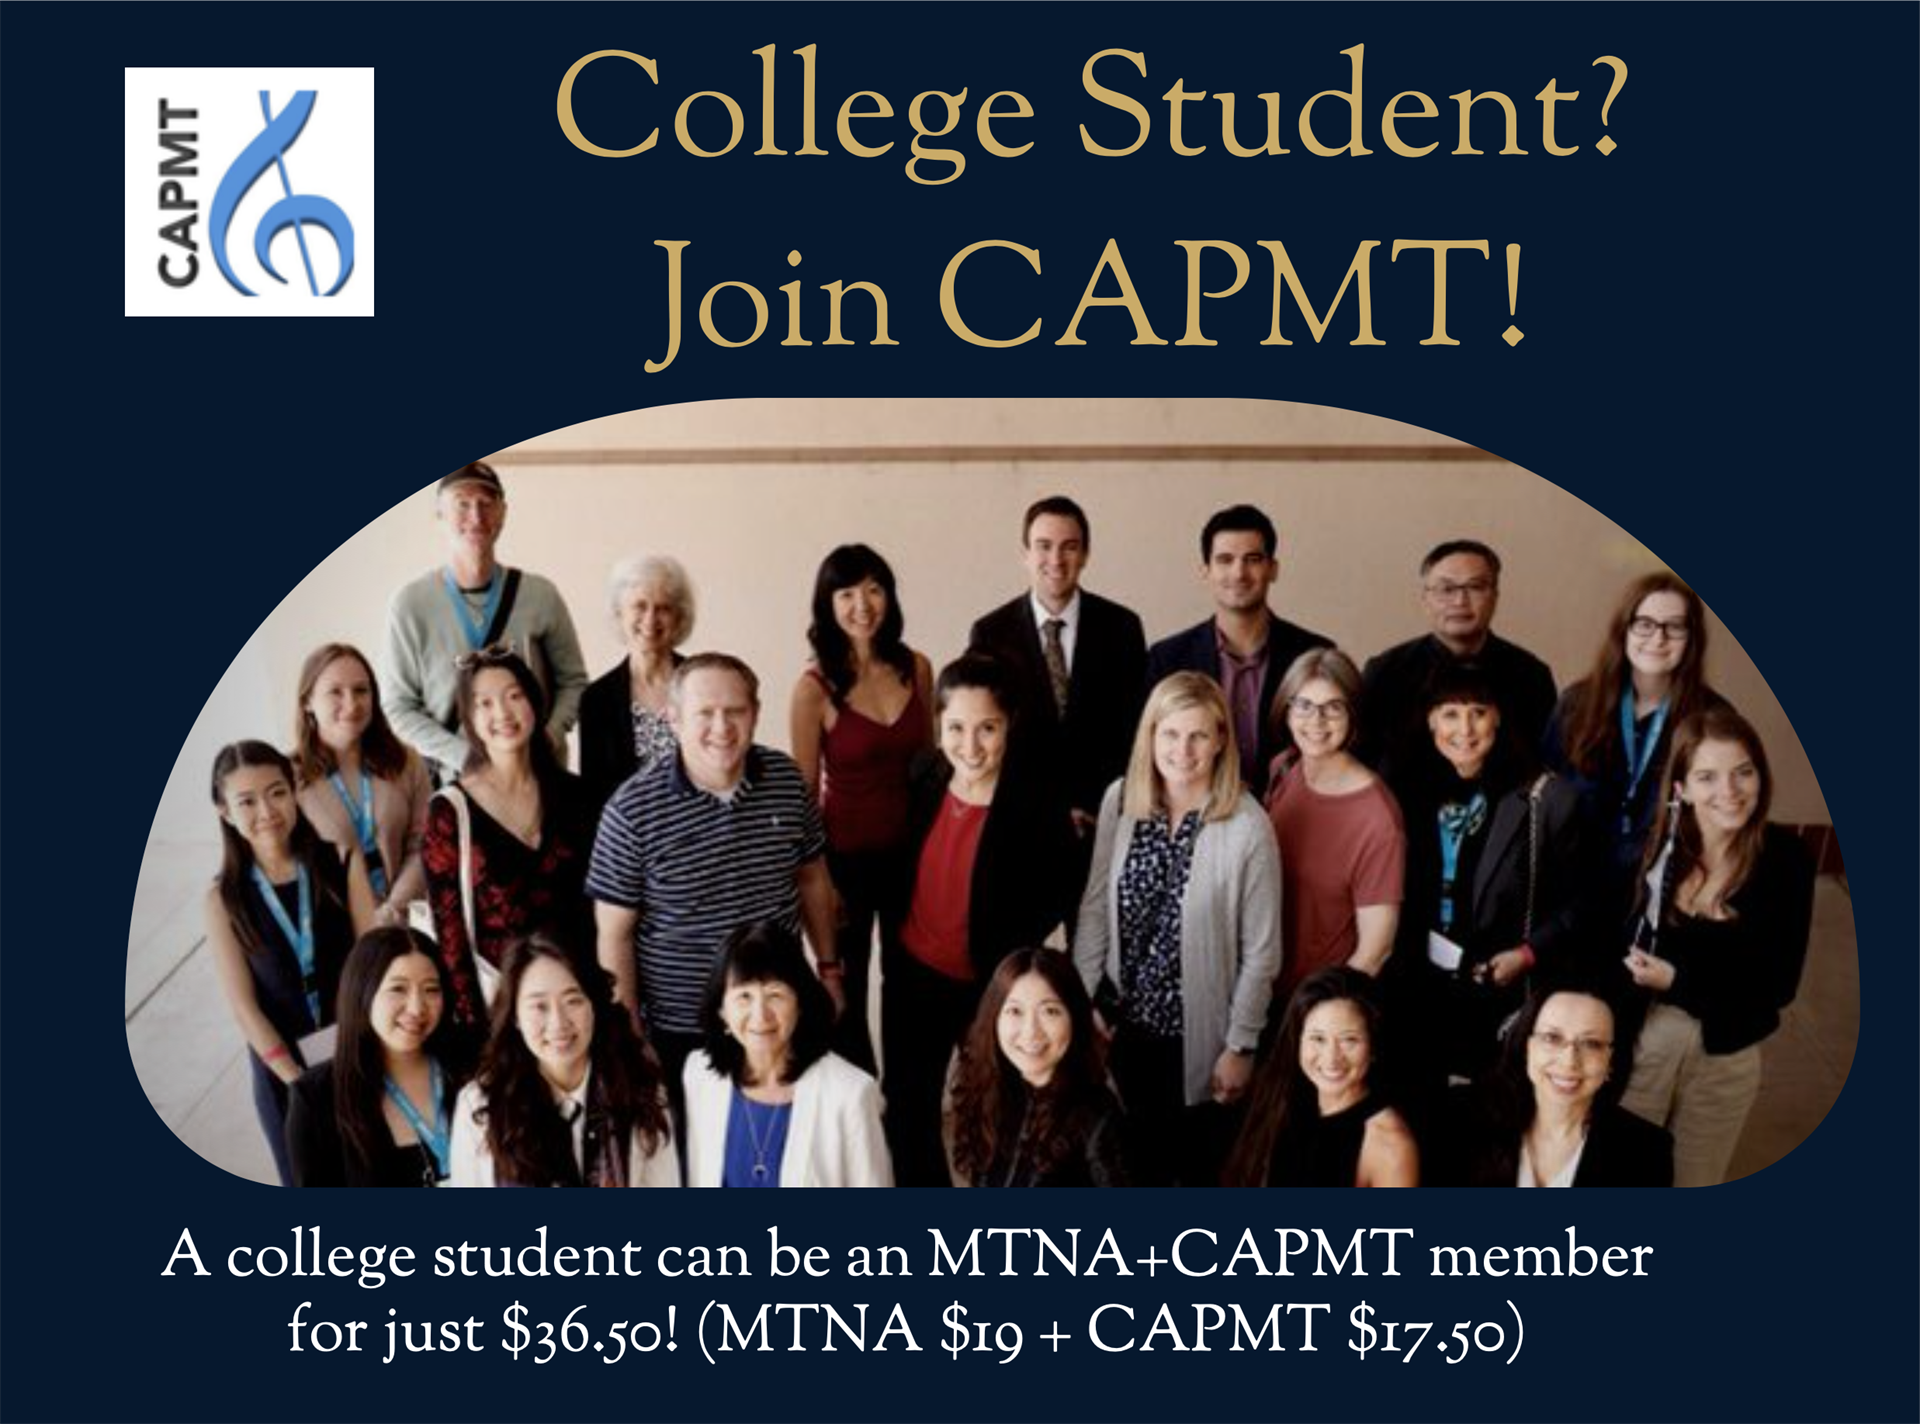 College Students, Join CAPMT!